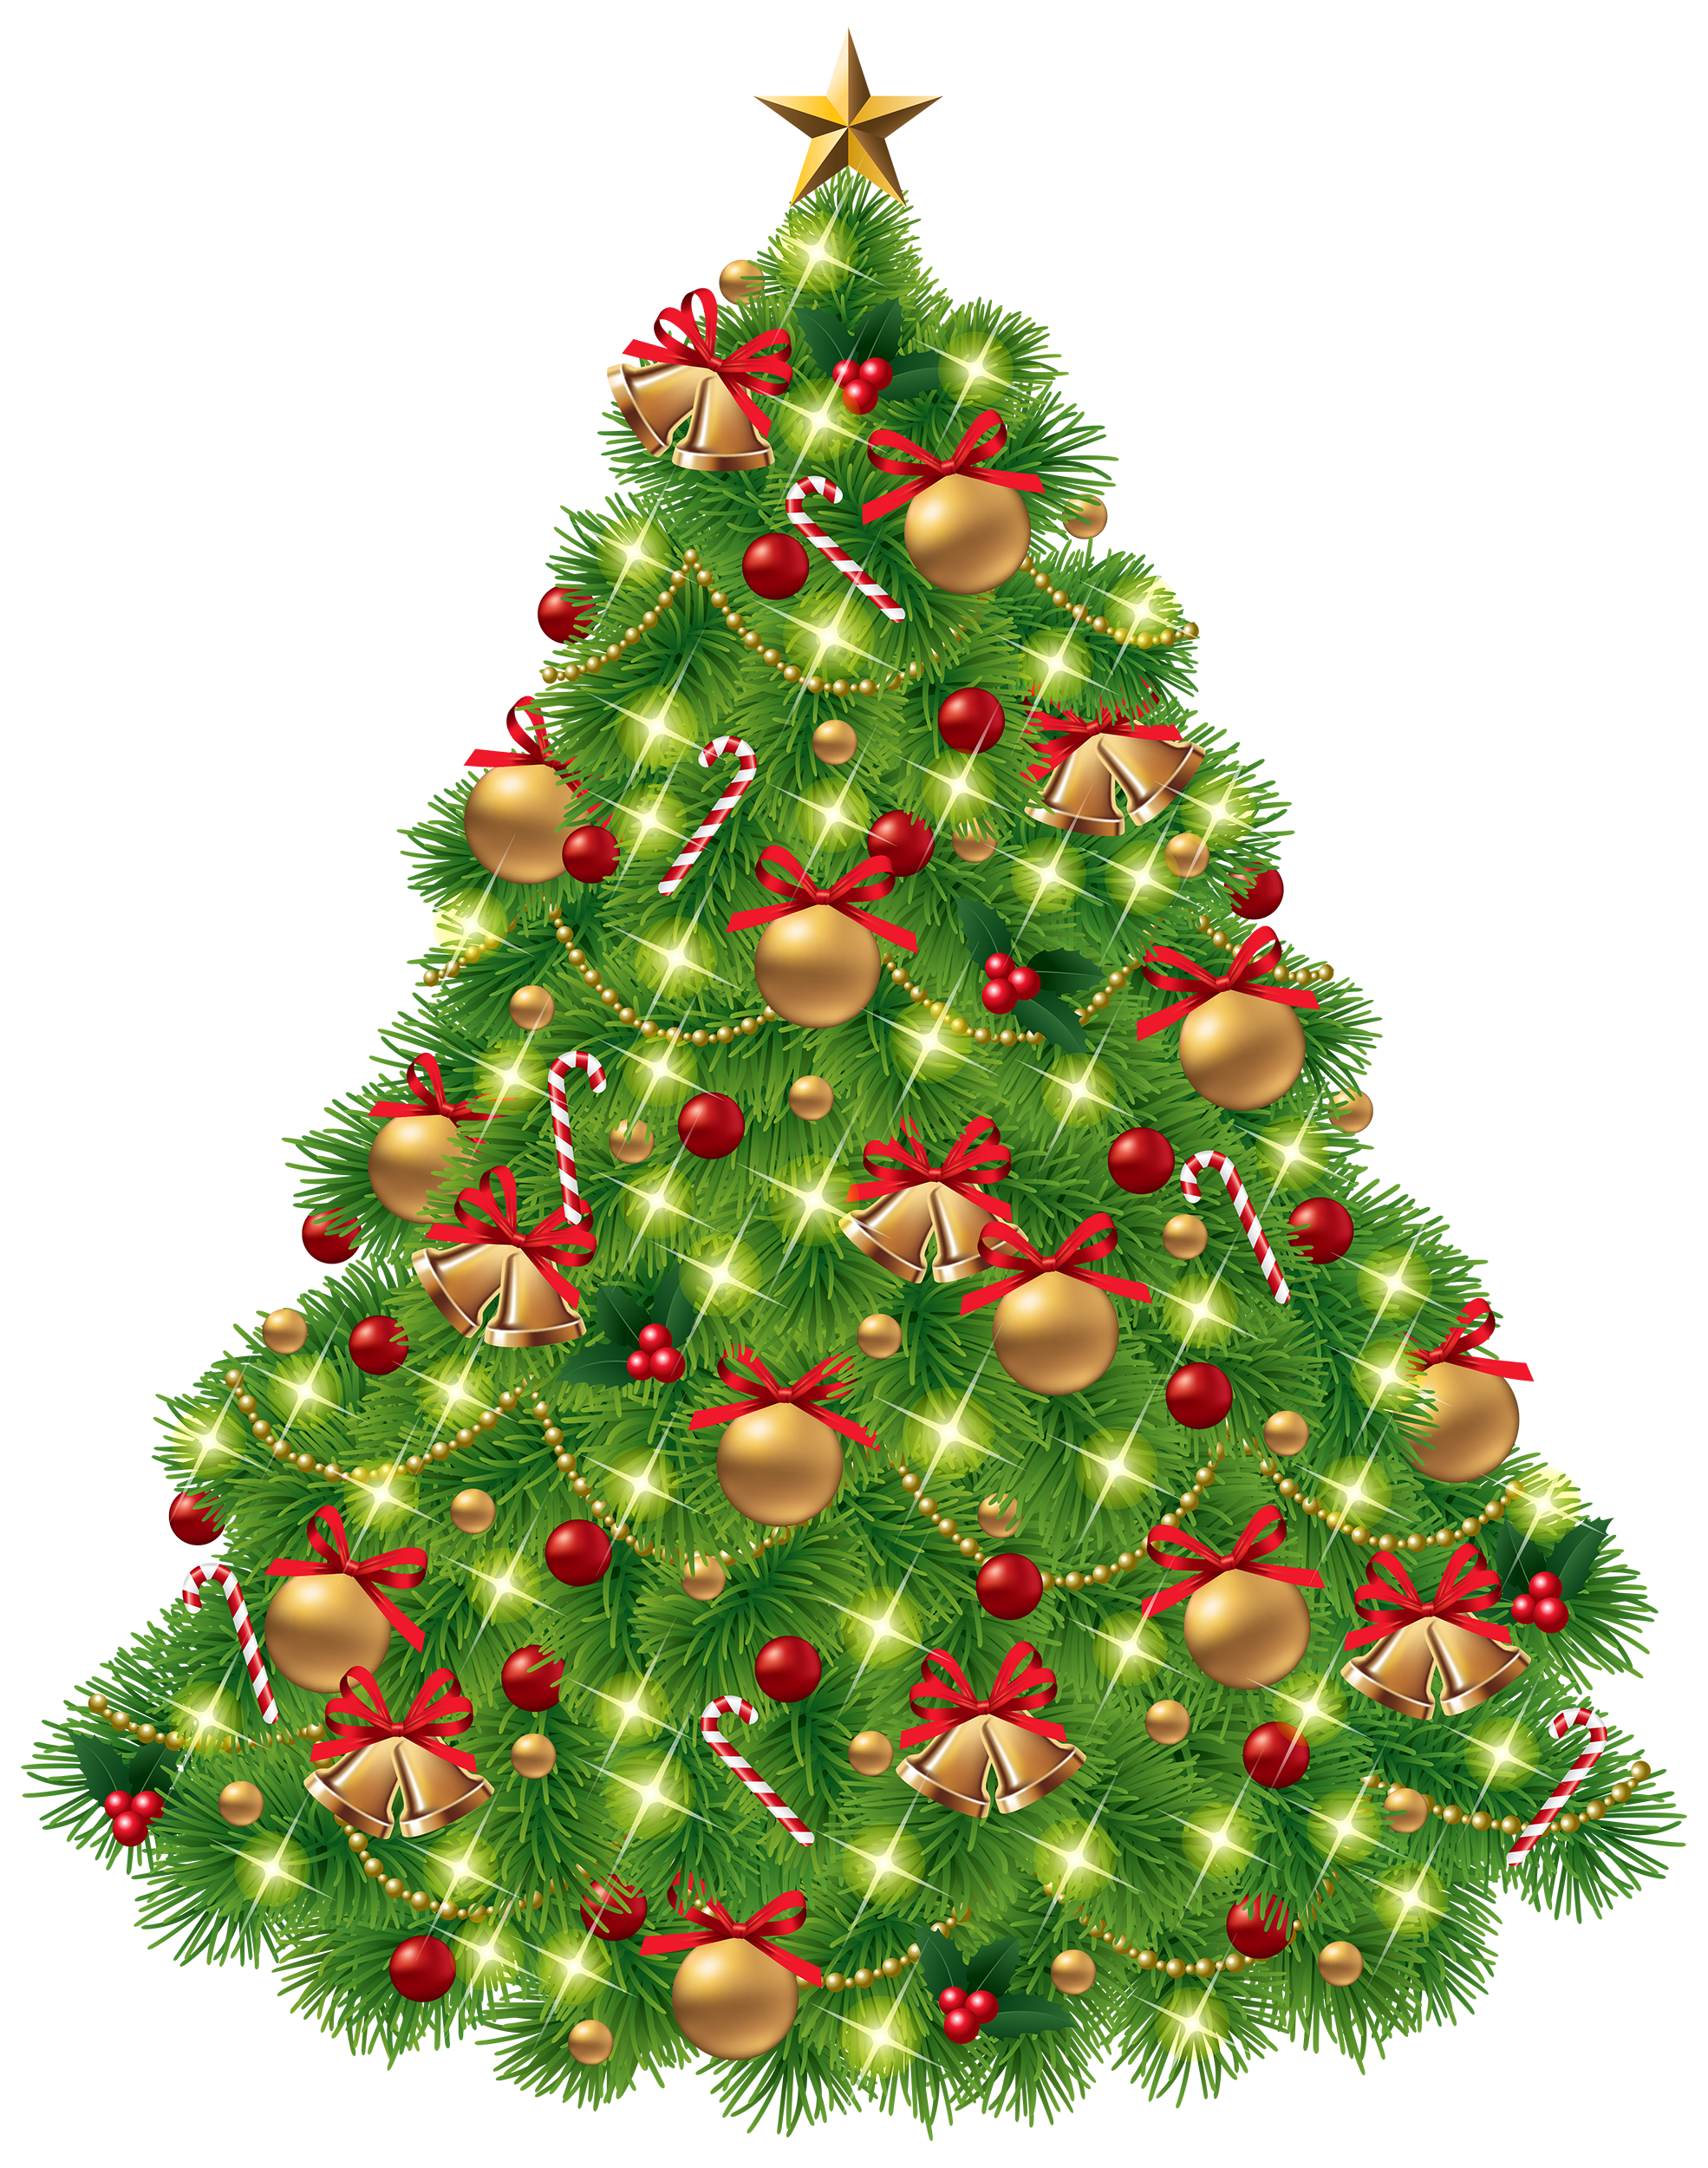 Fir-Tree Christmas Ornaments PNG Image High Quality PNG Image